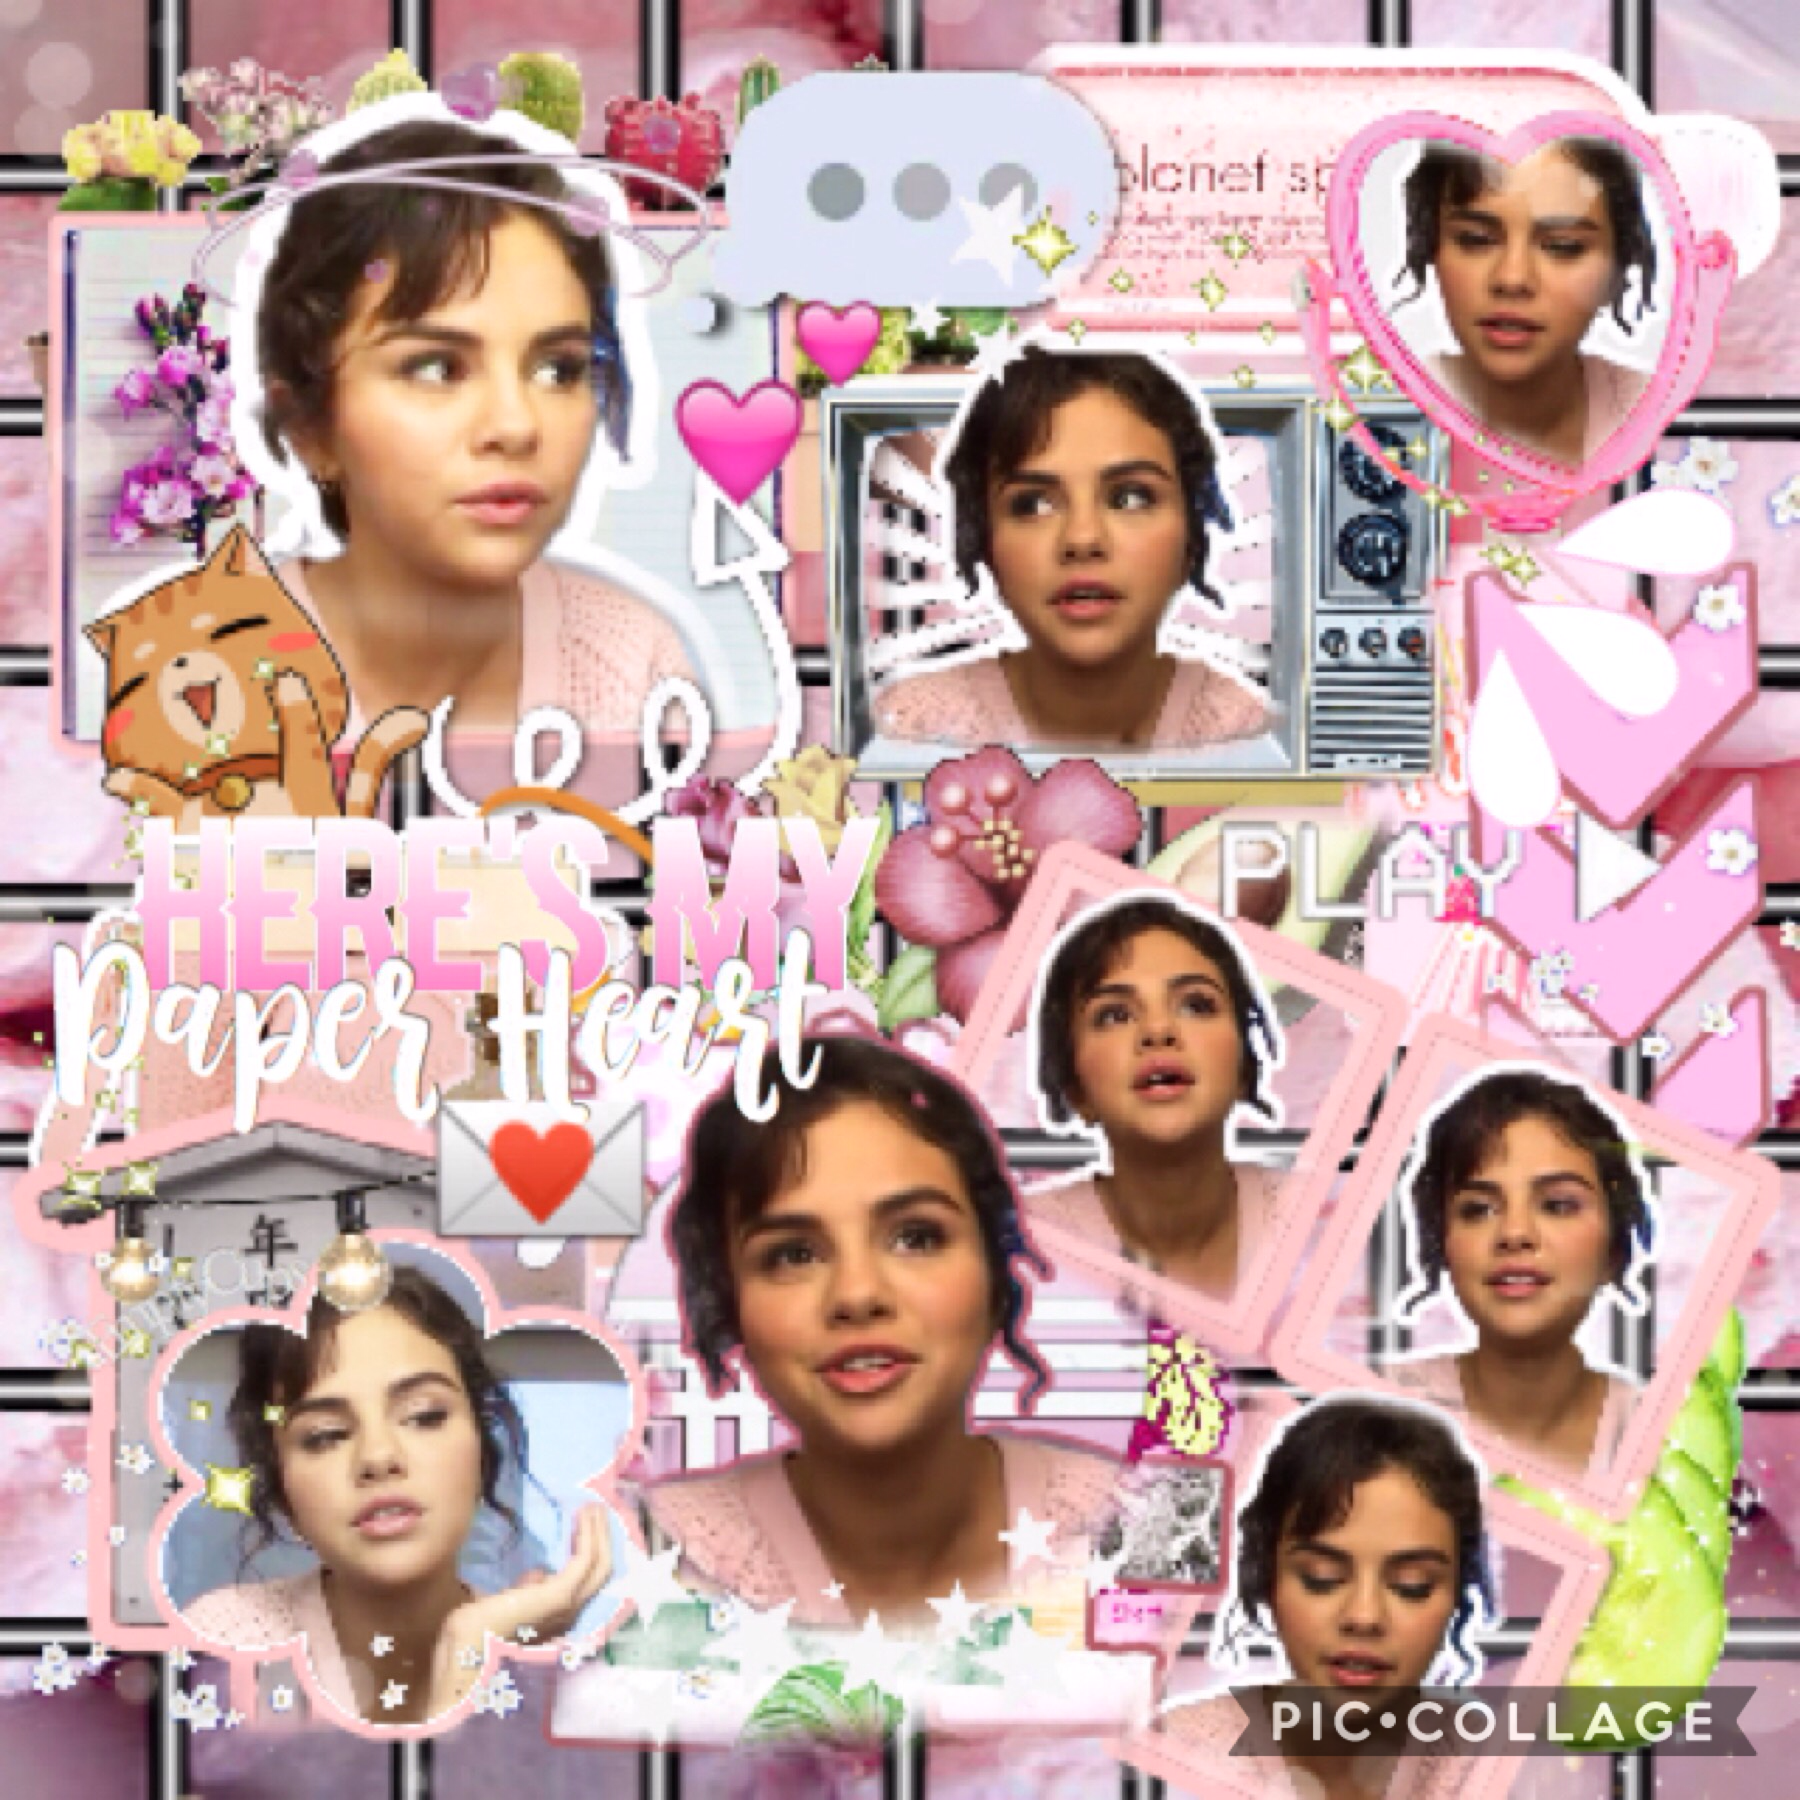 Selena 8.8.18 💌
School starts tomorrow 😐
I was going to post this last night but my phone crashed...fun
Sorry it's blurry! ✨
Song OTC: Paper Hearts
Artist(s): The Vamps 💌